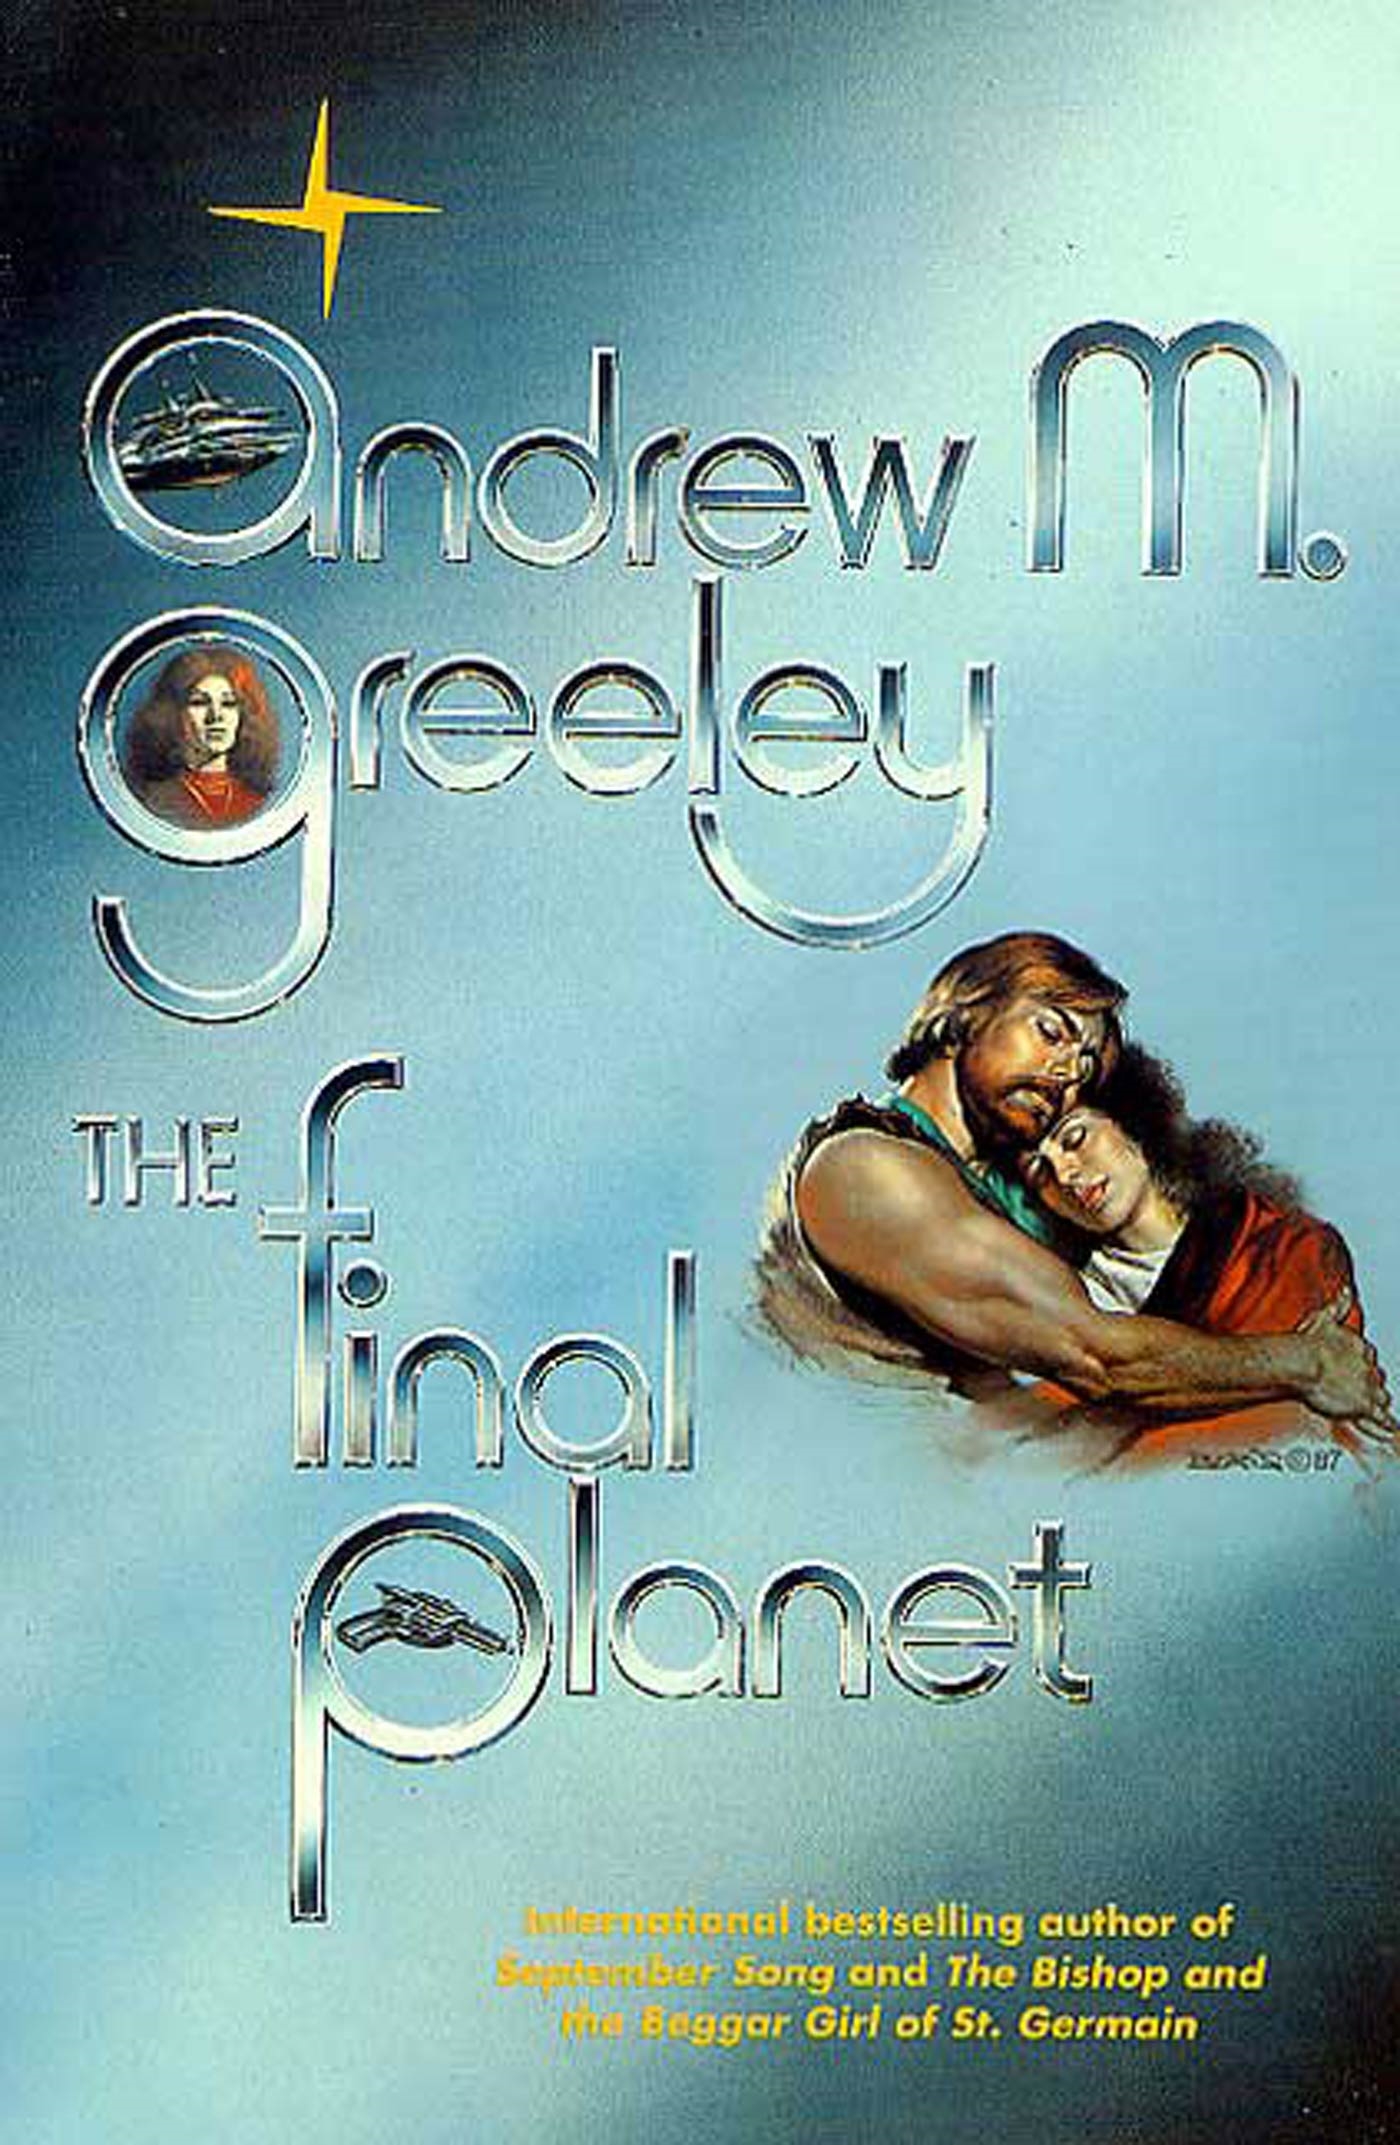 The Final Planet by Andrew M. Greeley